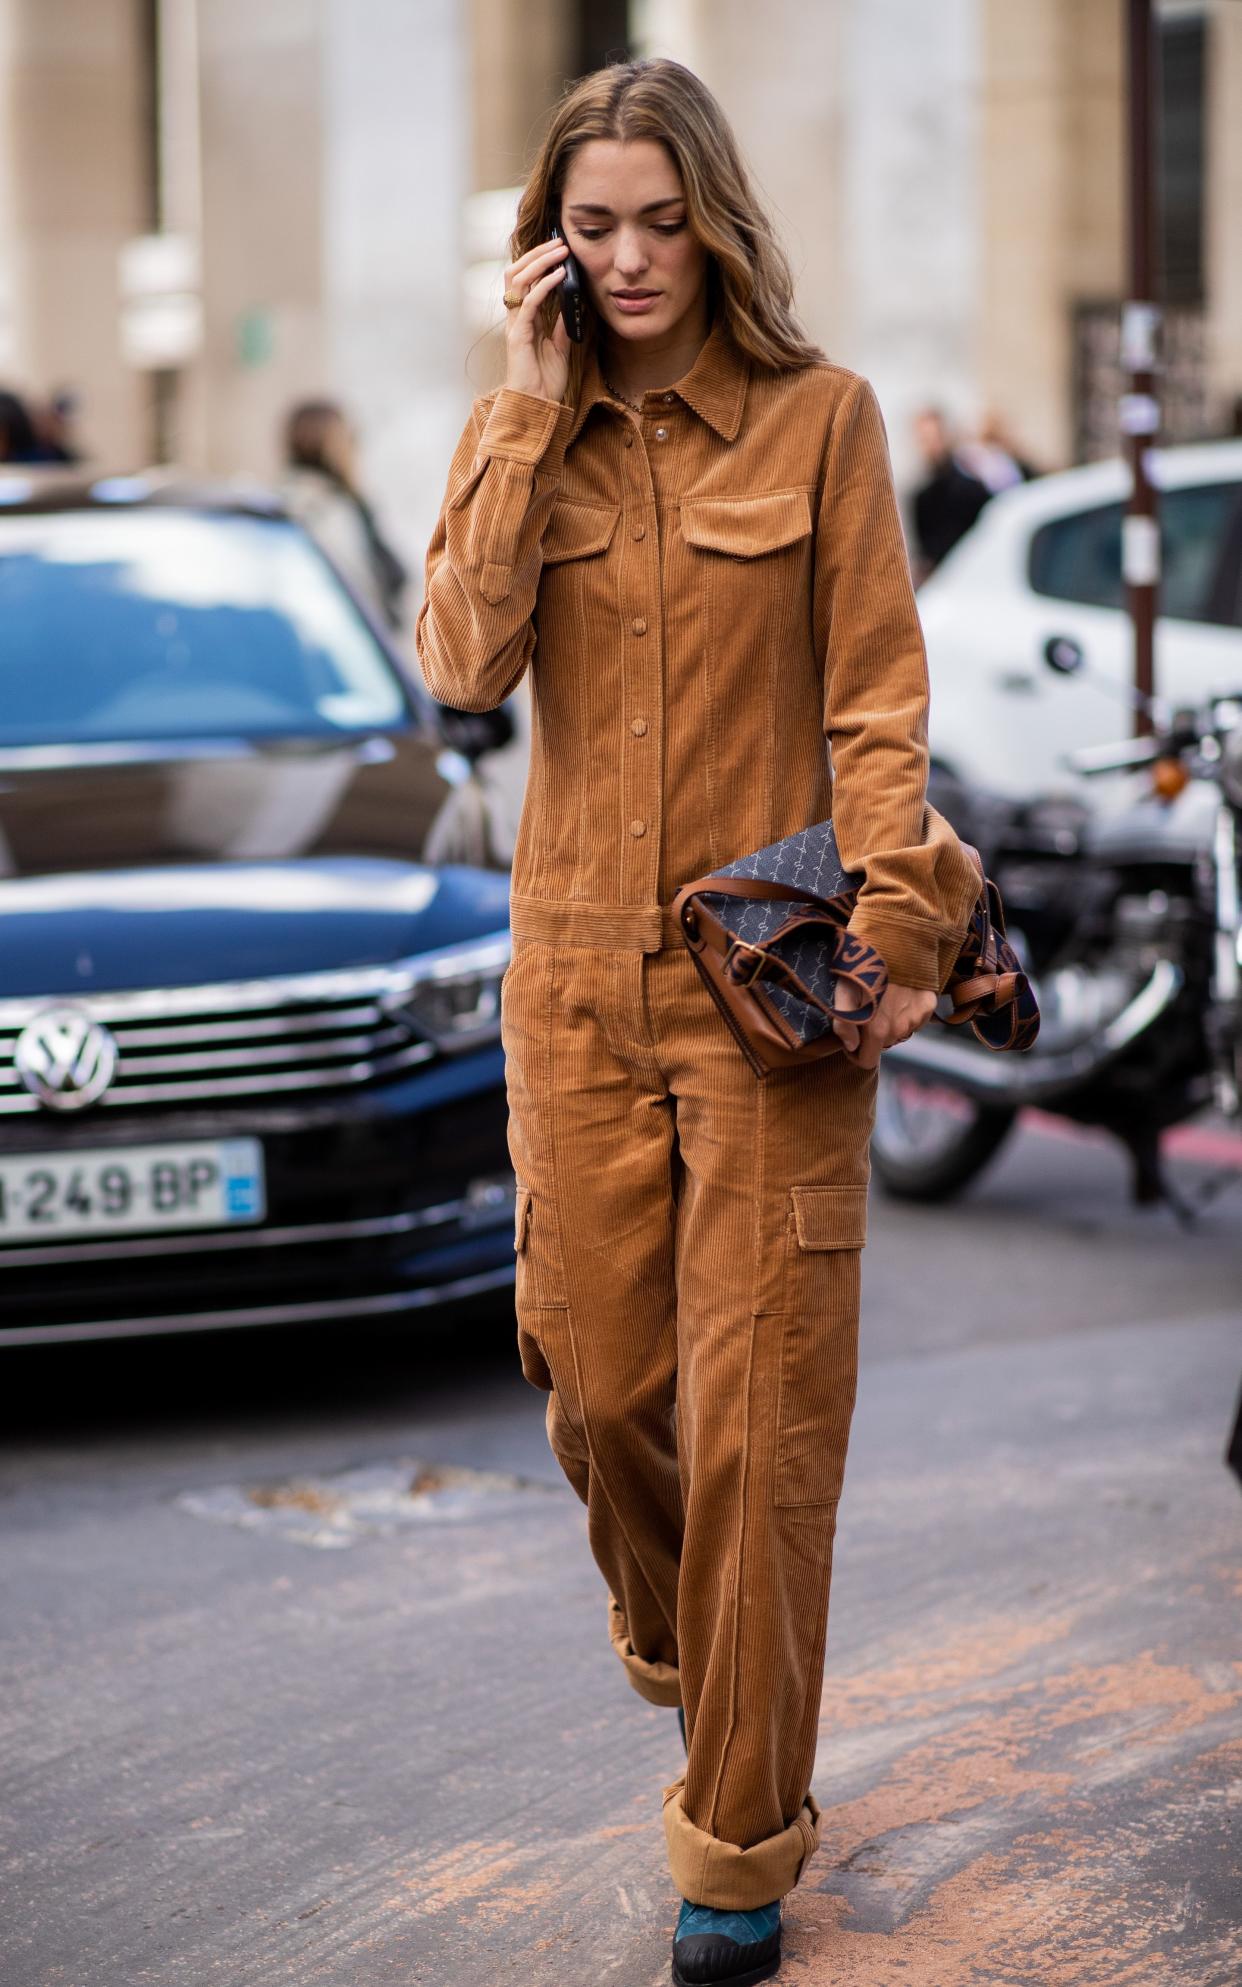 A corduroy boilersuit ticks two trend boxes for the new season. - 2018 Christian Vierig